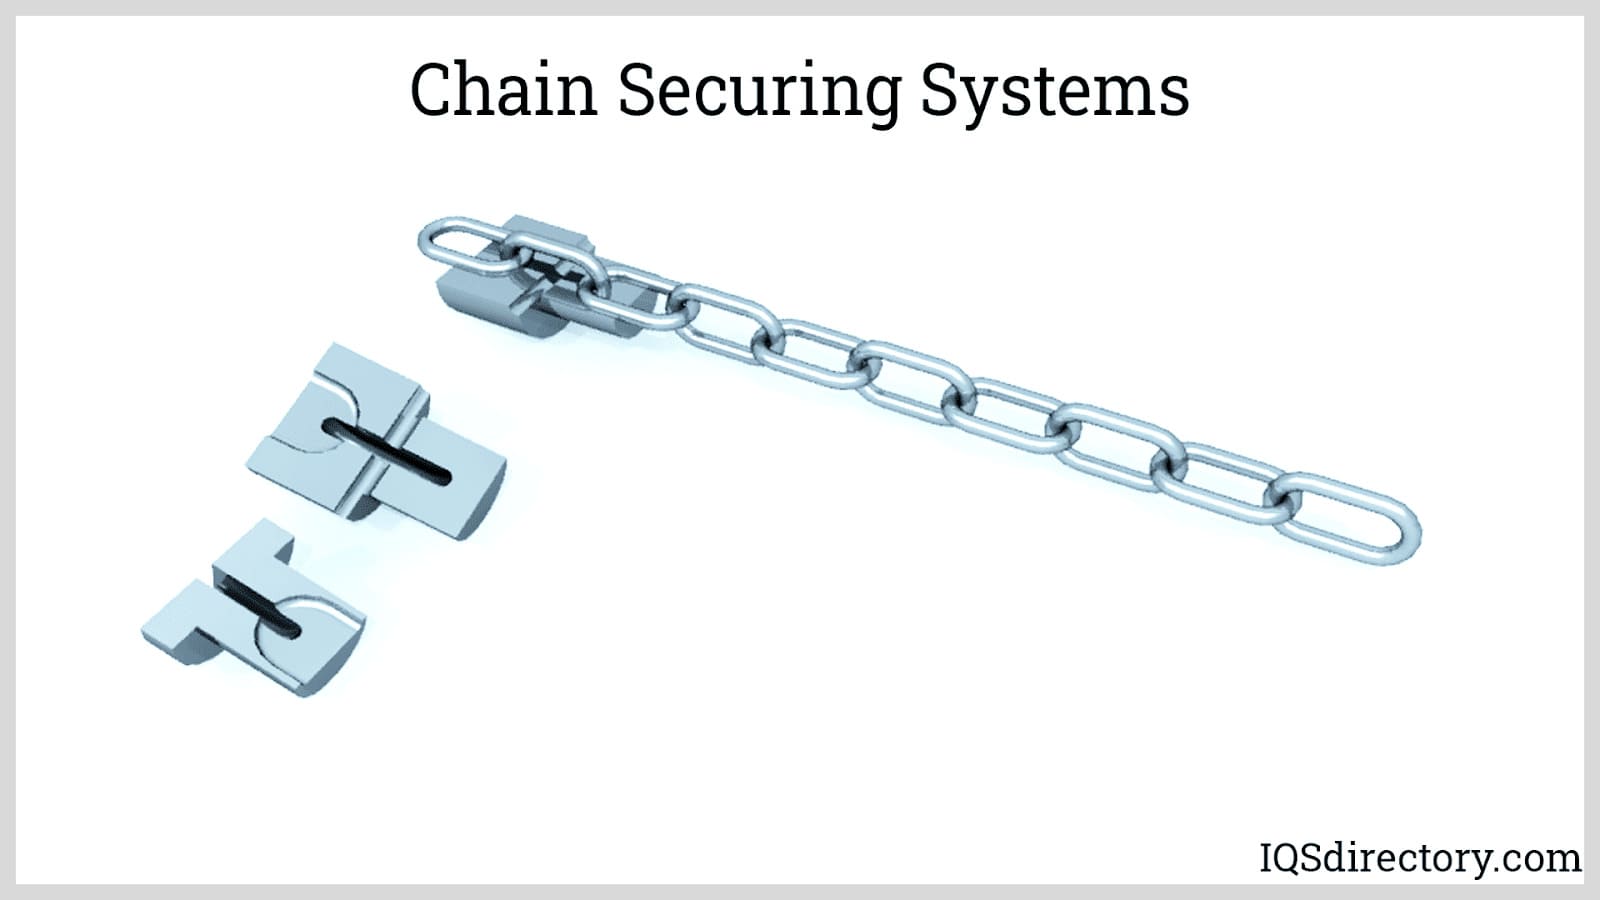 Chain Securing Systems